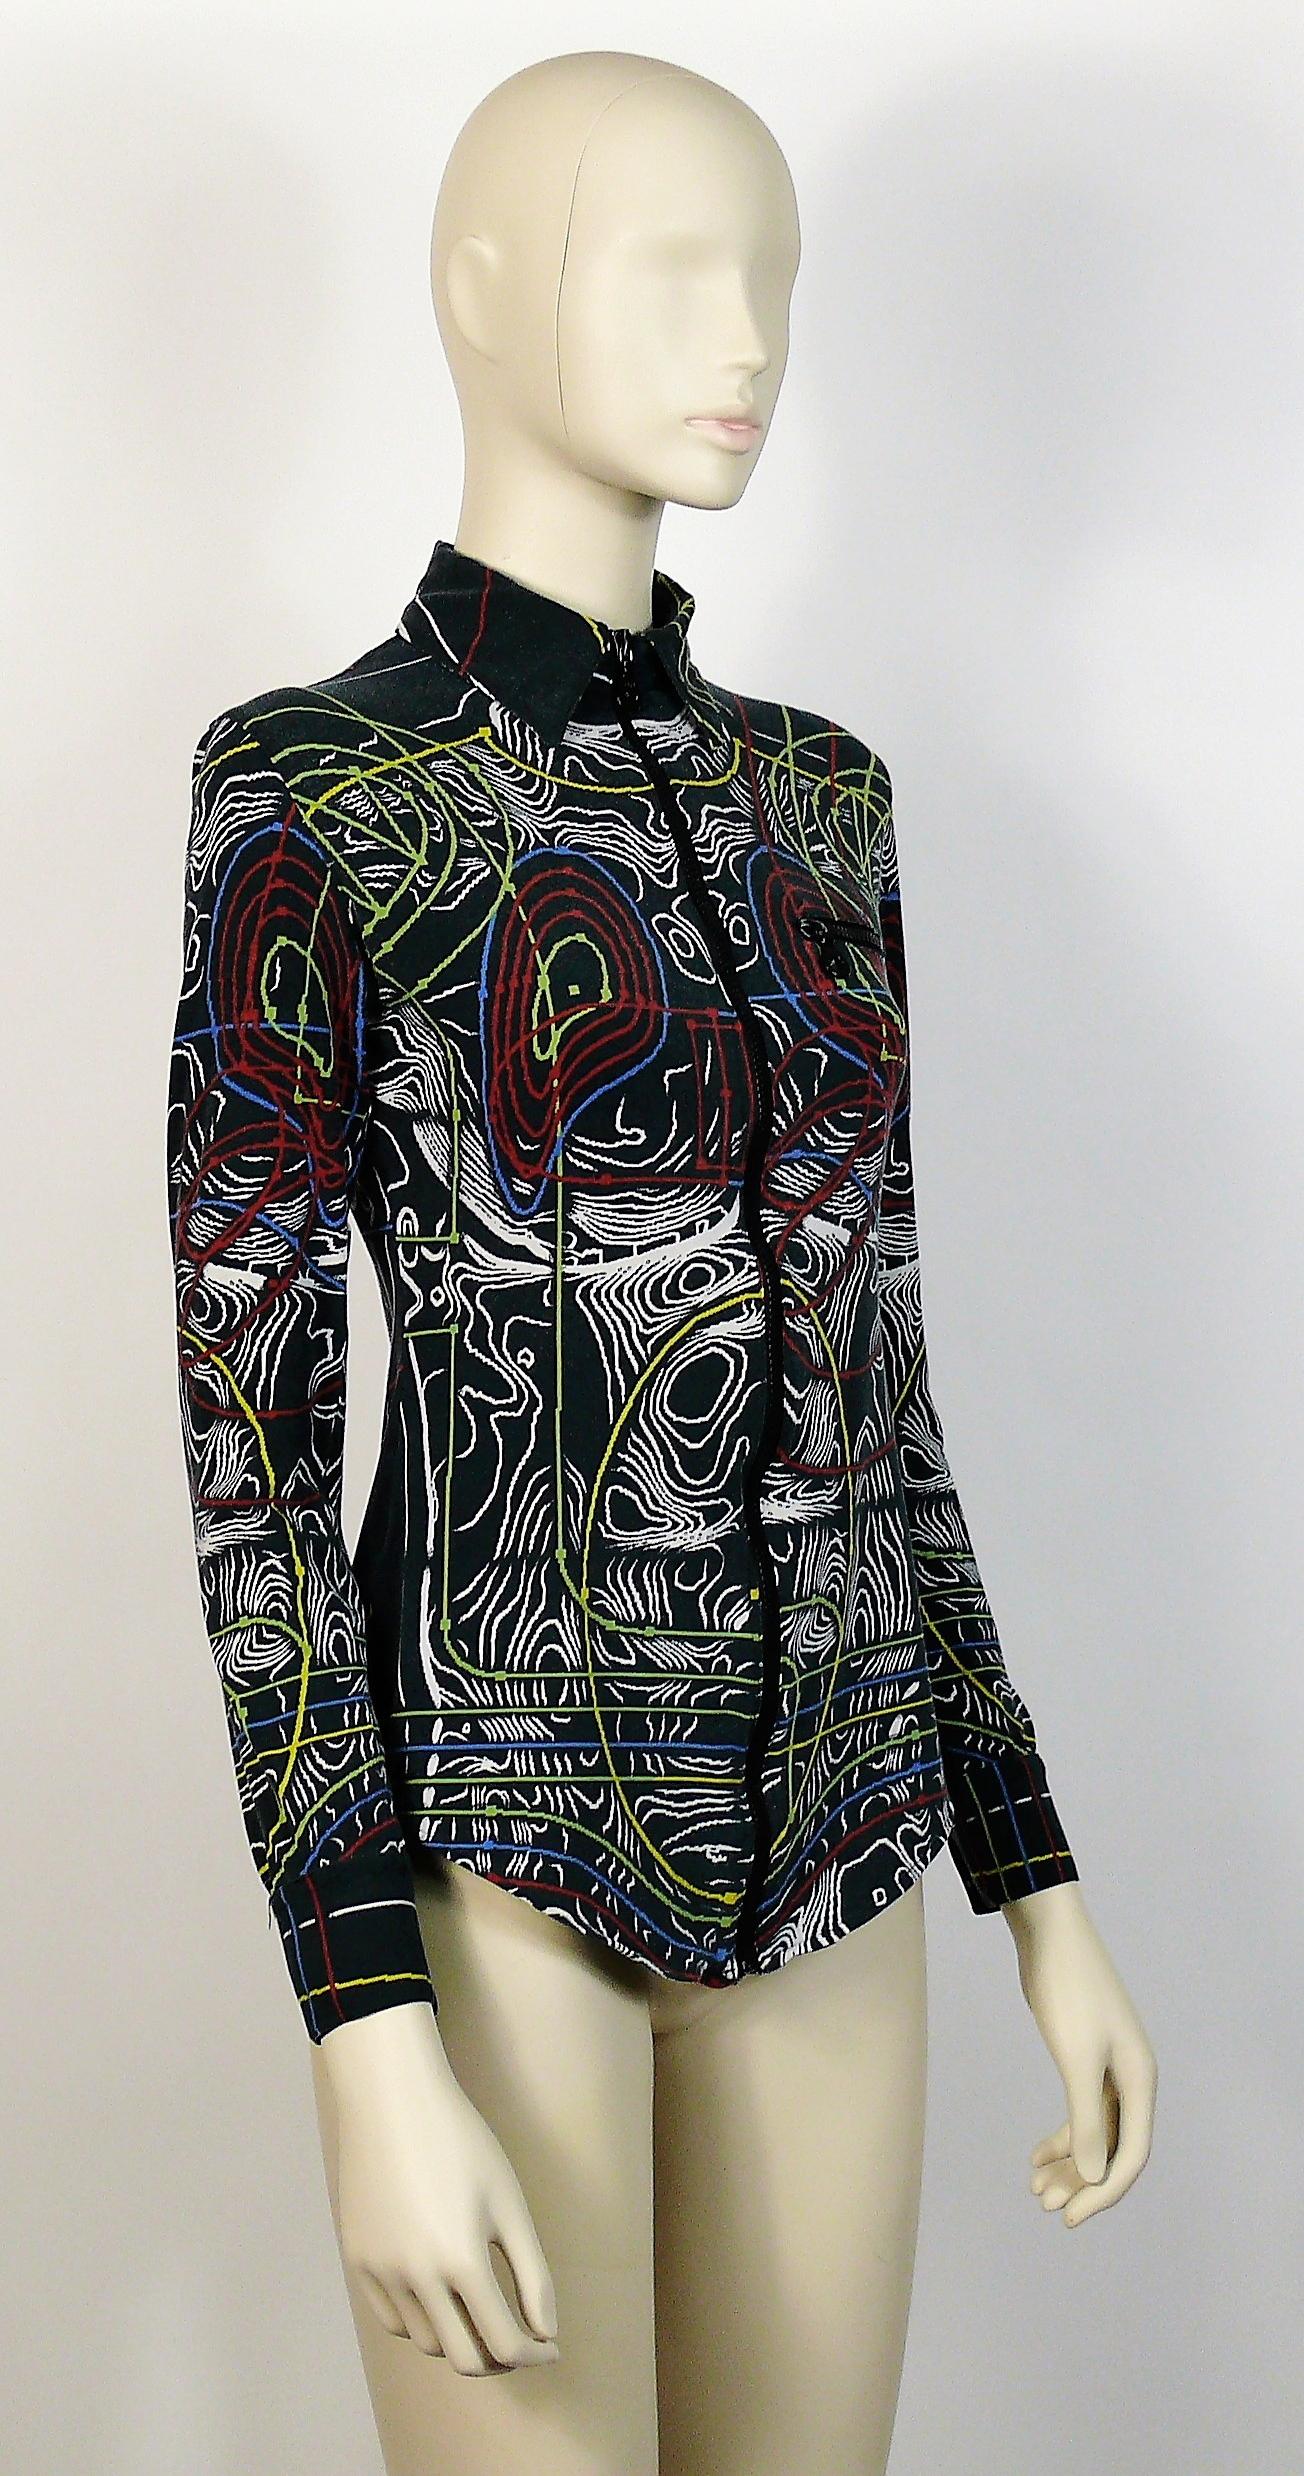 JEAN PAUL GAULTIER vintage top featuring a multicolored circuit cyborg print all over.

Zip neck.
Long sleeves.
Cuff snap buttoning.

Label reads JPG Paris Made in Italy.

Size tag reads : S.
Please refer to measurements.

Missing composition